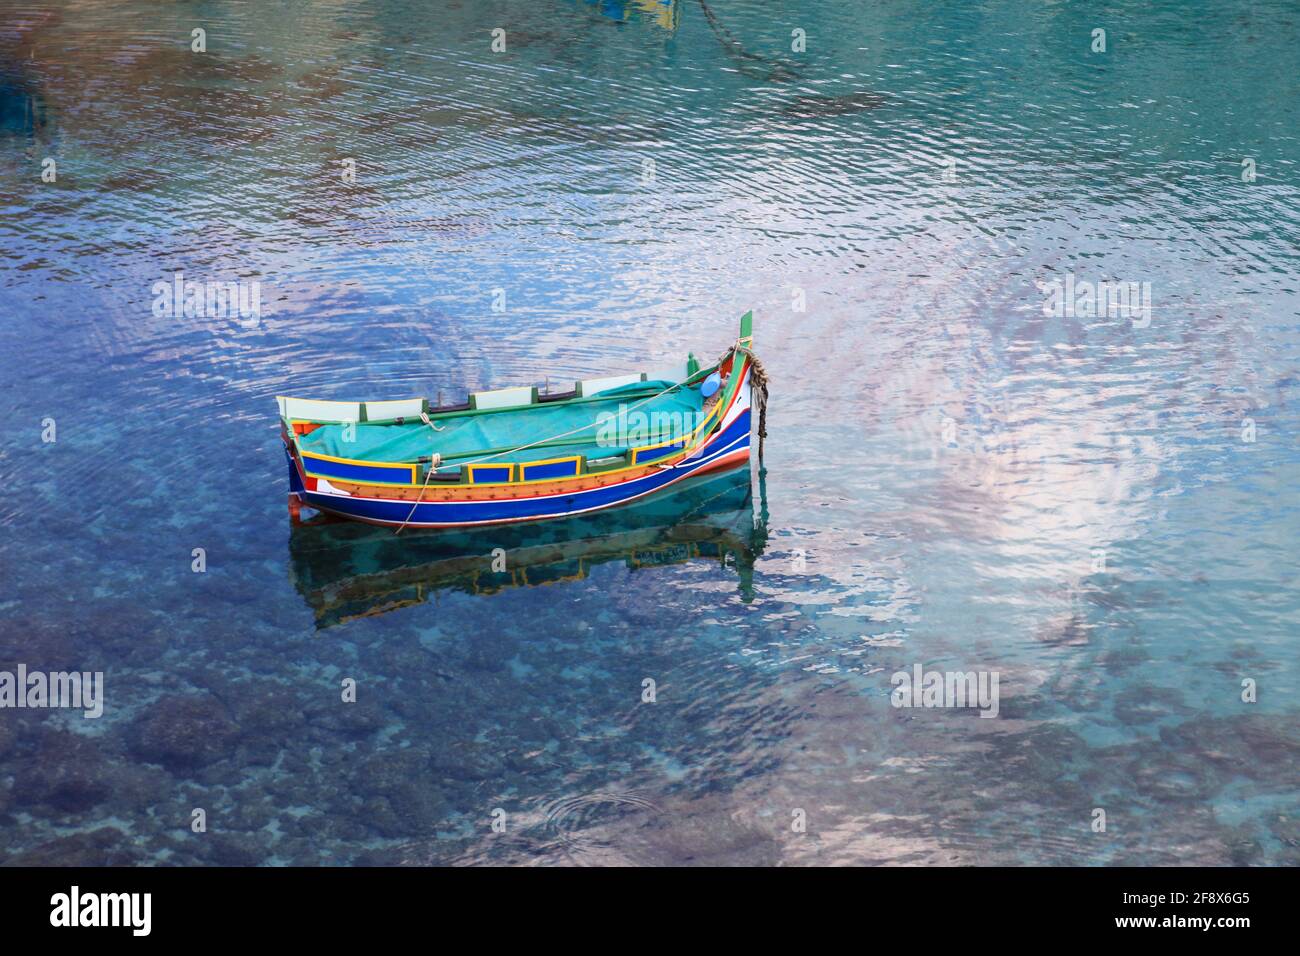 A blue boat located on a turquoise water Stock Photo